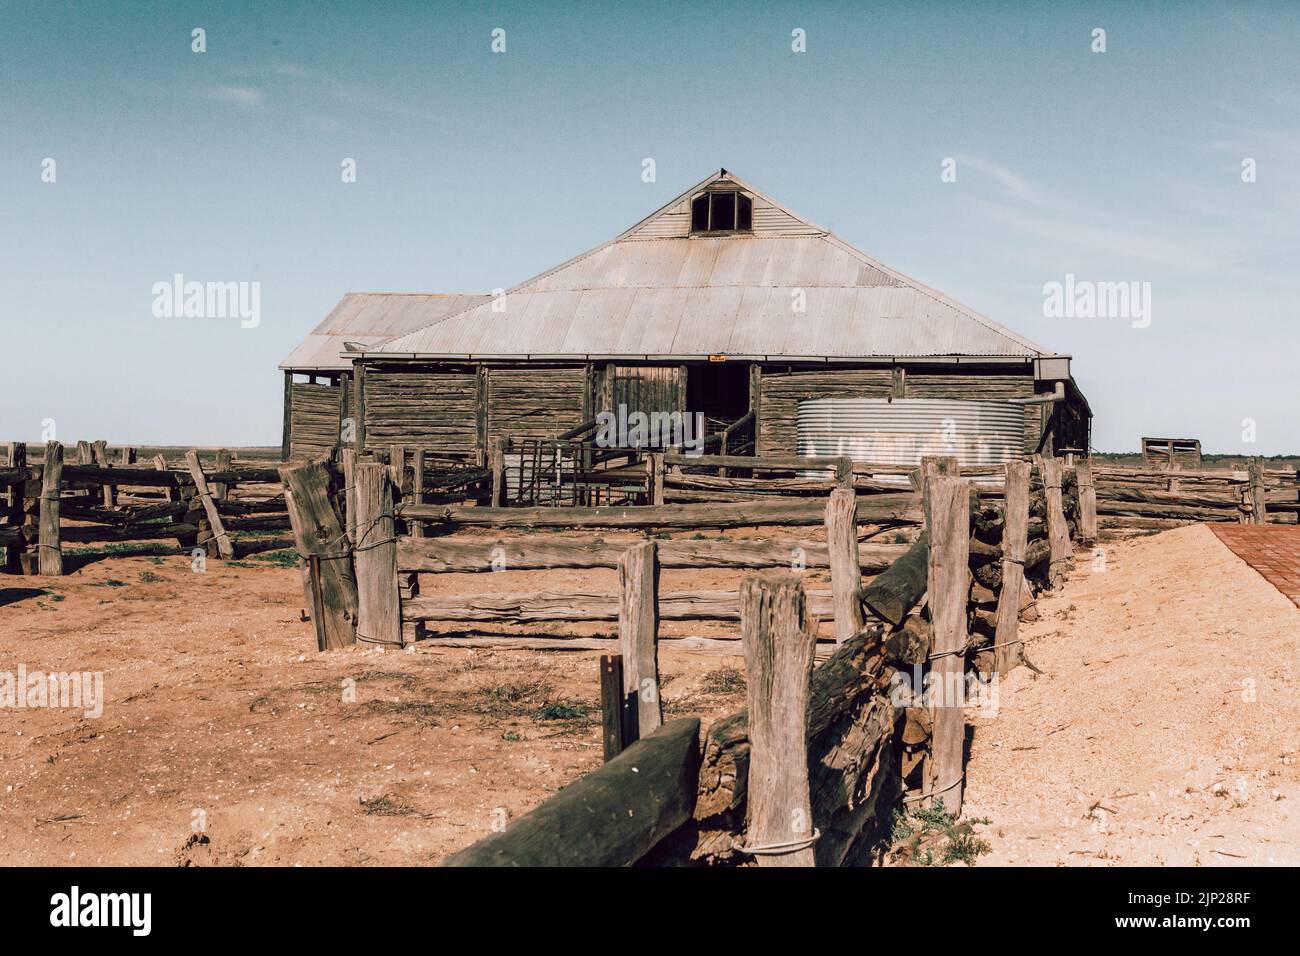 Rustic old shearing shed and corrals in outback Australia Stock Photo